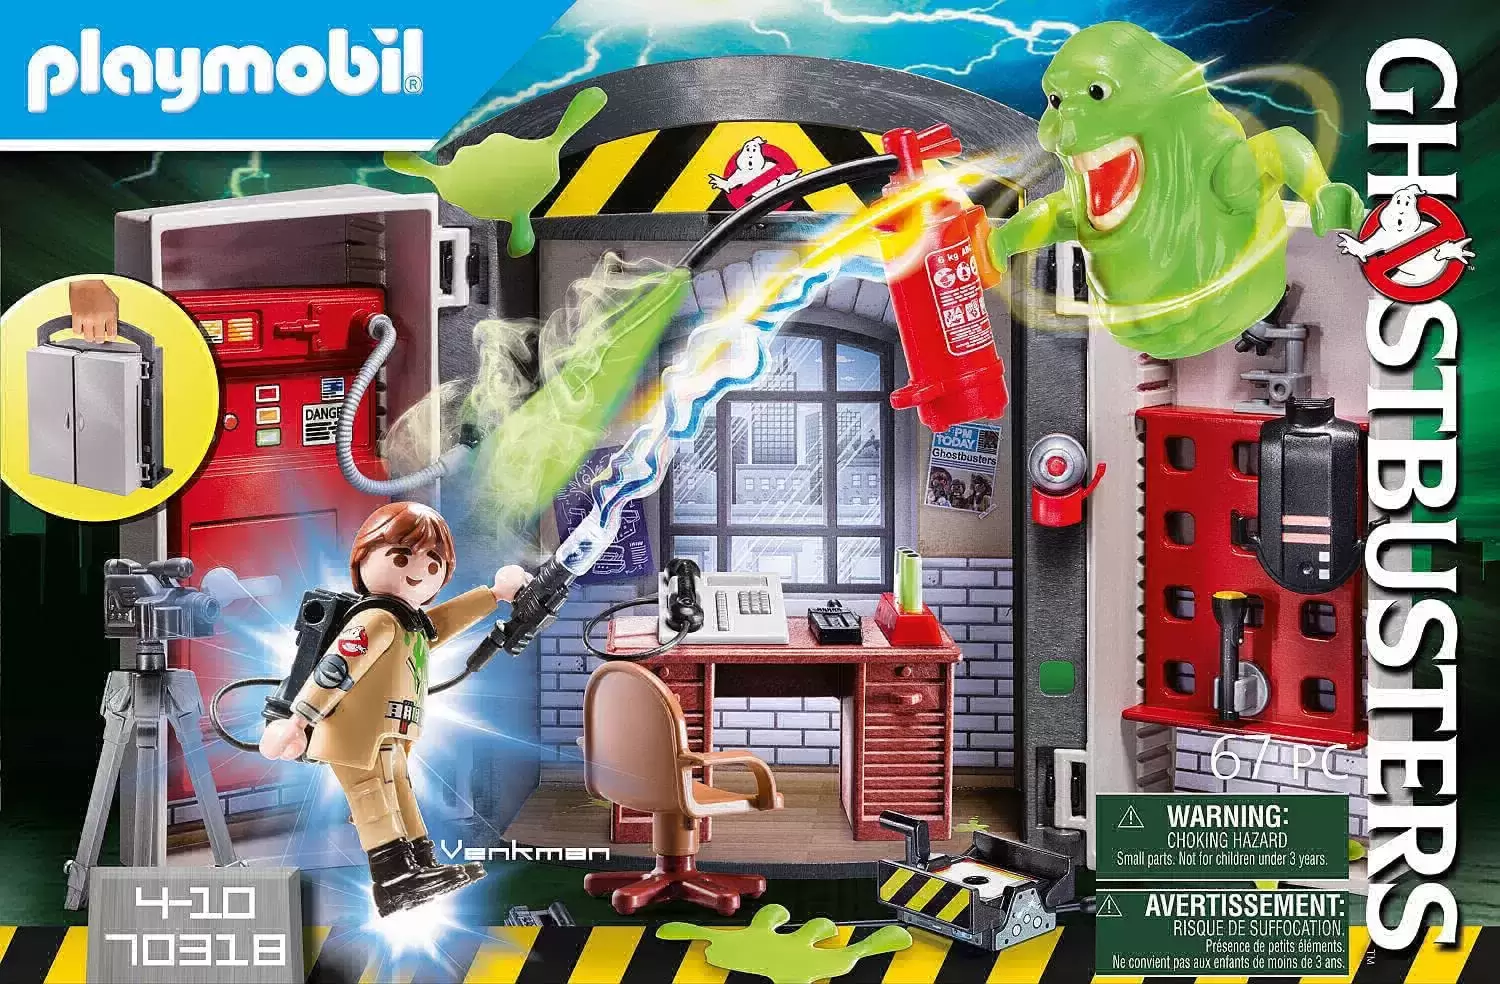 Playmobil Ghosbusters - Ghostbusters Play Box